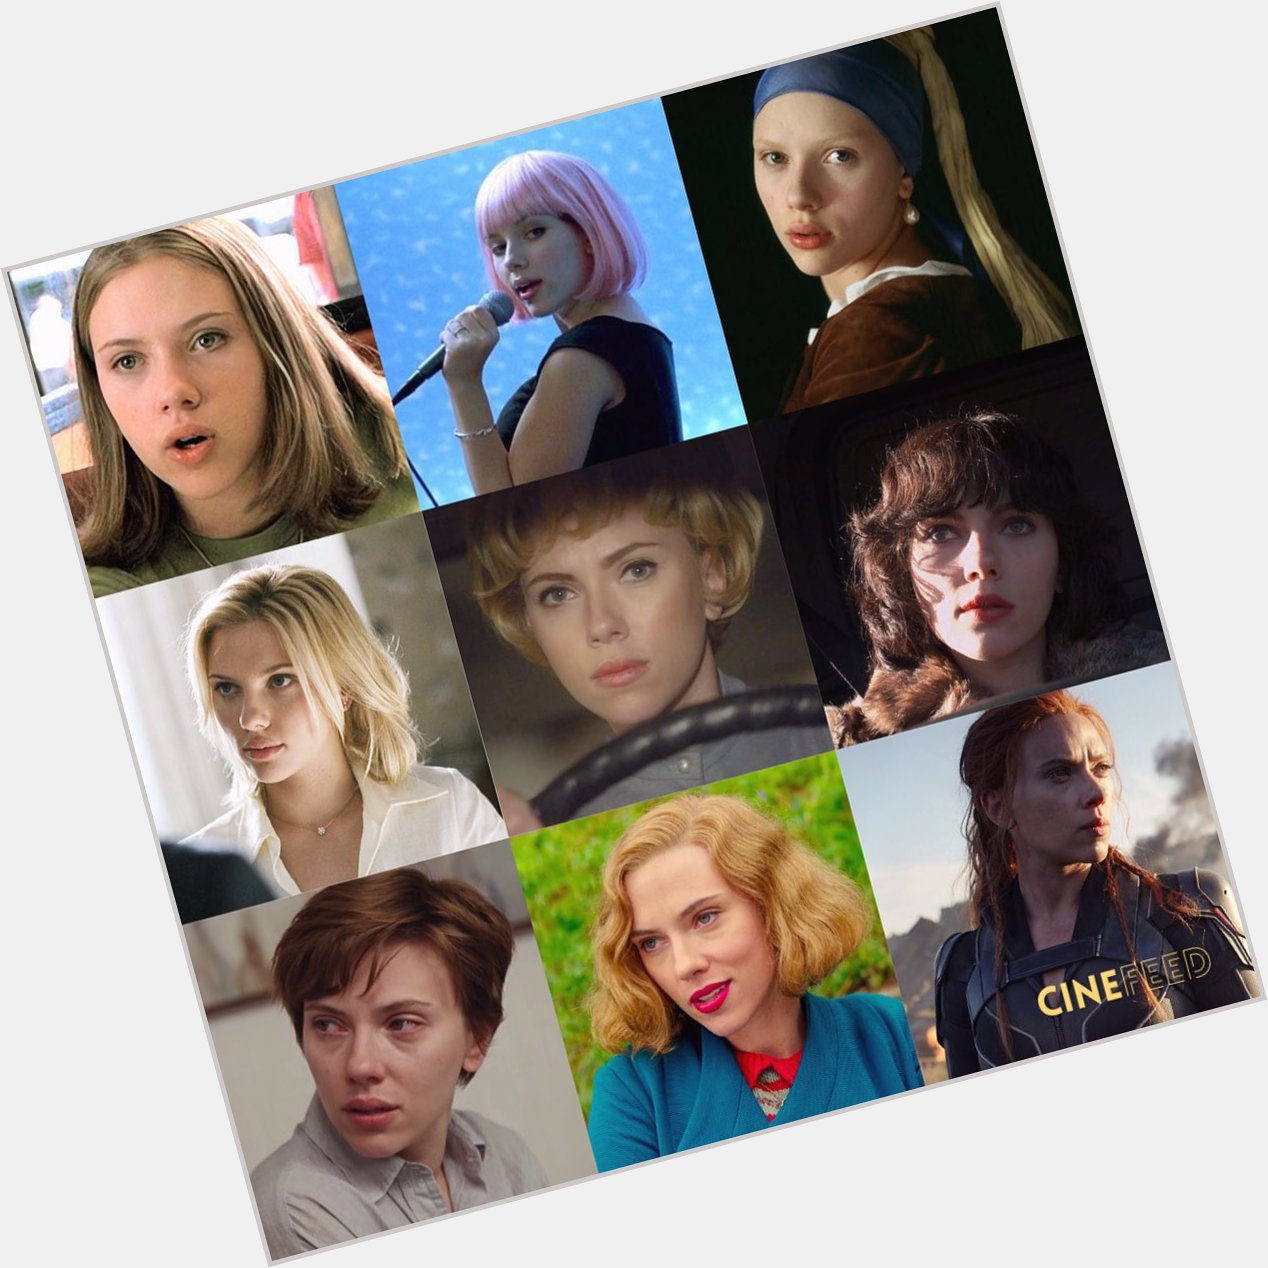 Happy Birthday to the amazing Scarlett Johansson!

Can you name all of her films in the picture? 